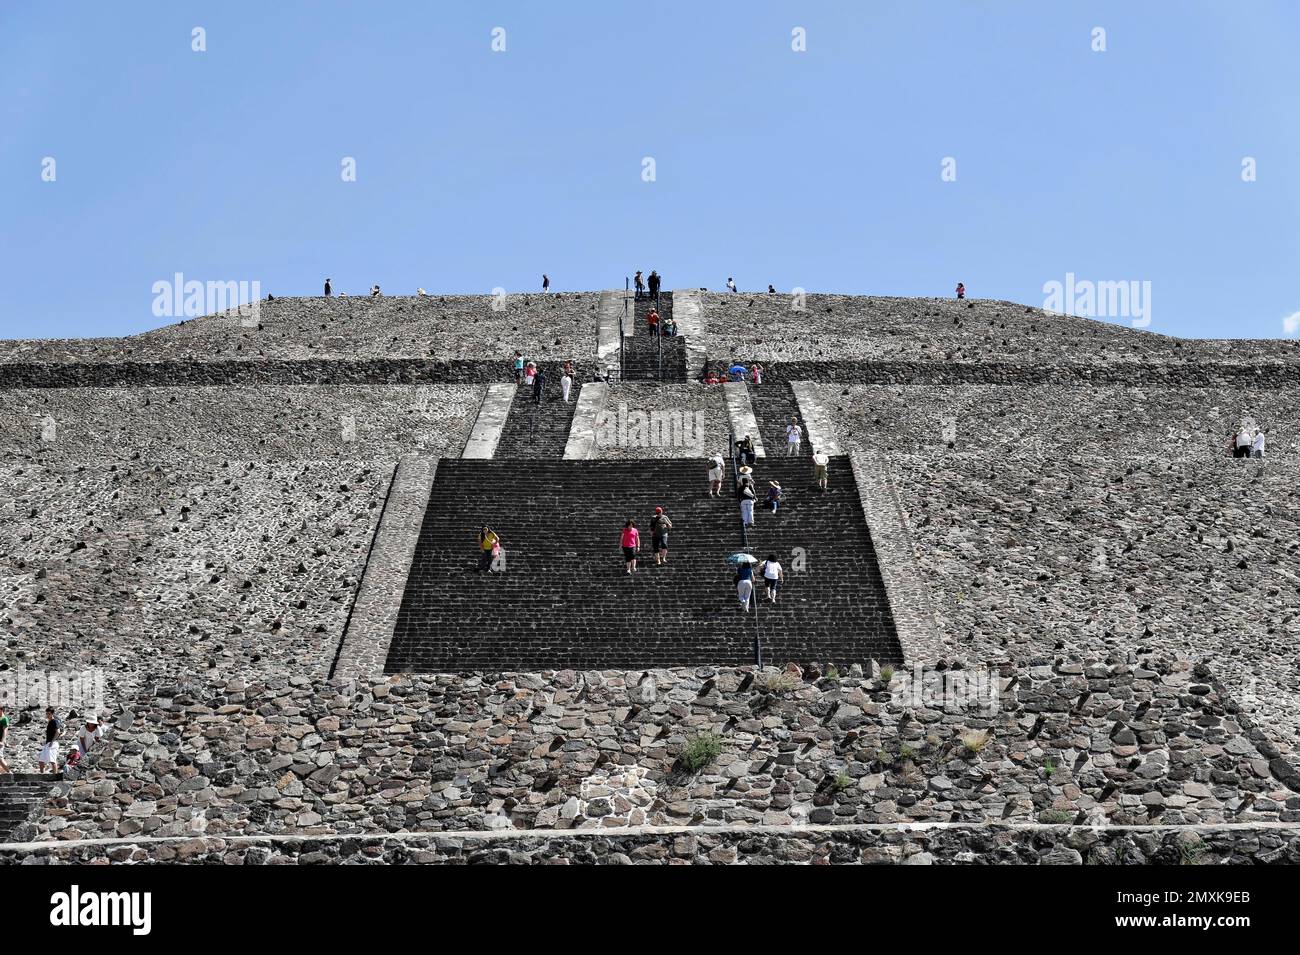 Pyramid of the Sun, Pyramids of Teotihuacán, UNESCO World Heritage Site, Teotihuacán, State of Mexico, Mexico, Central America Stock Photo